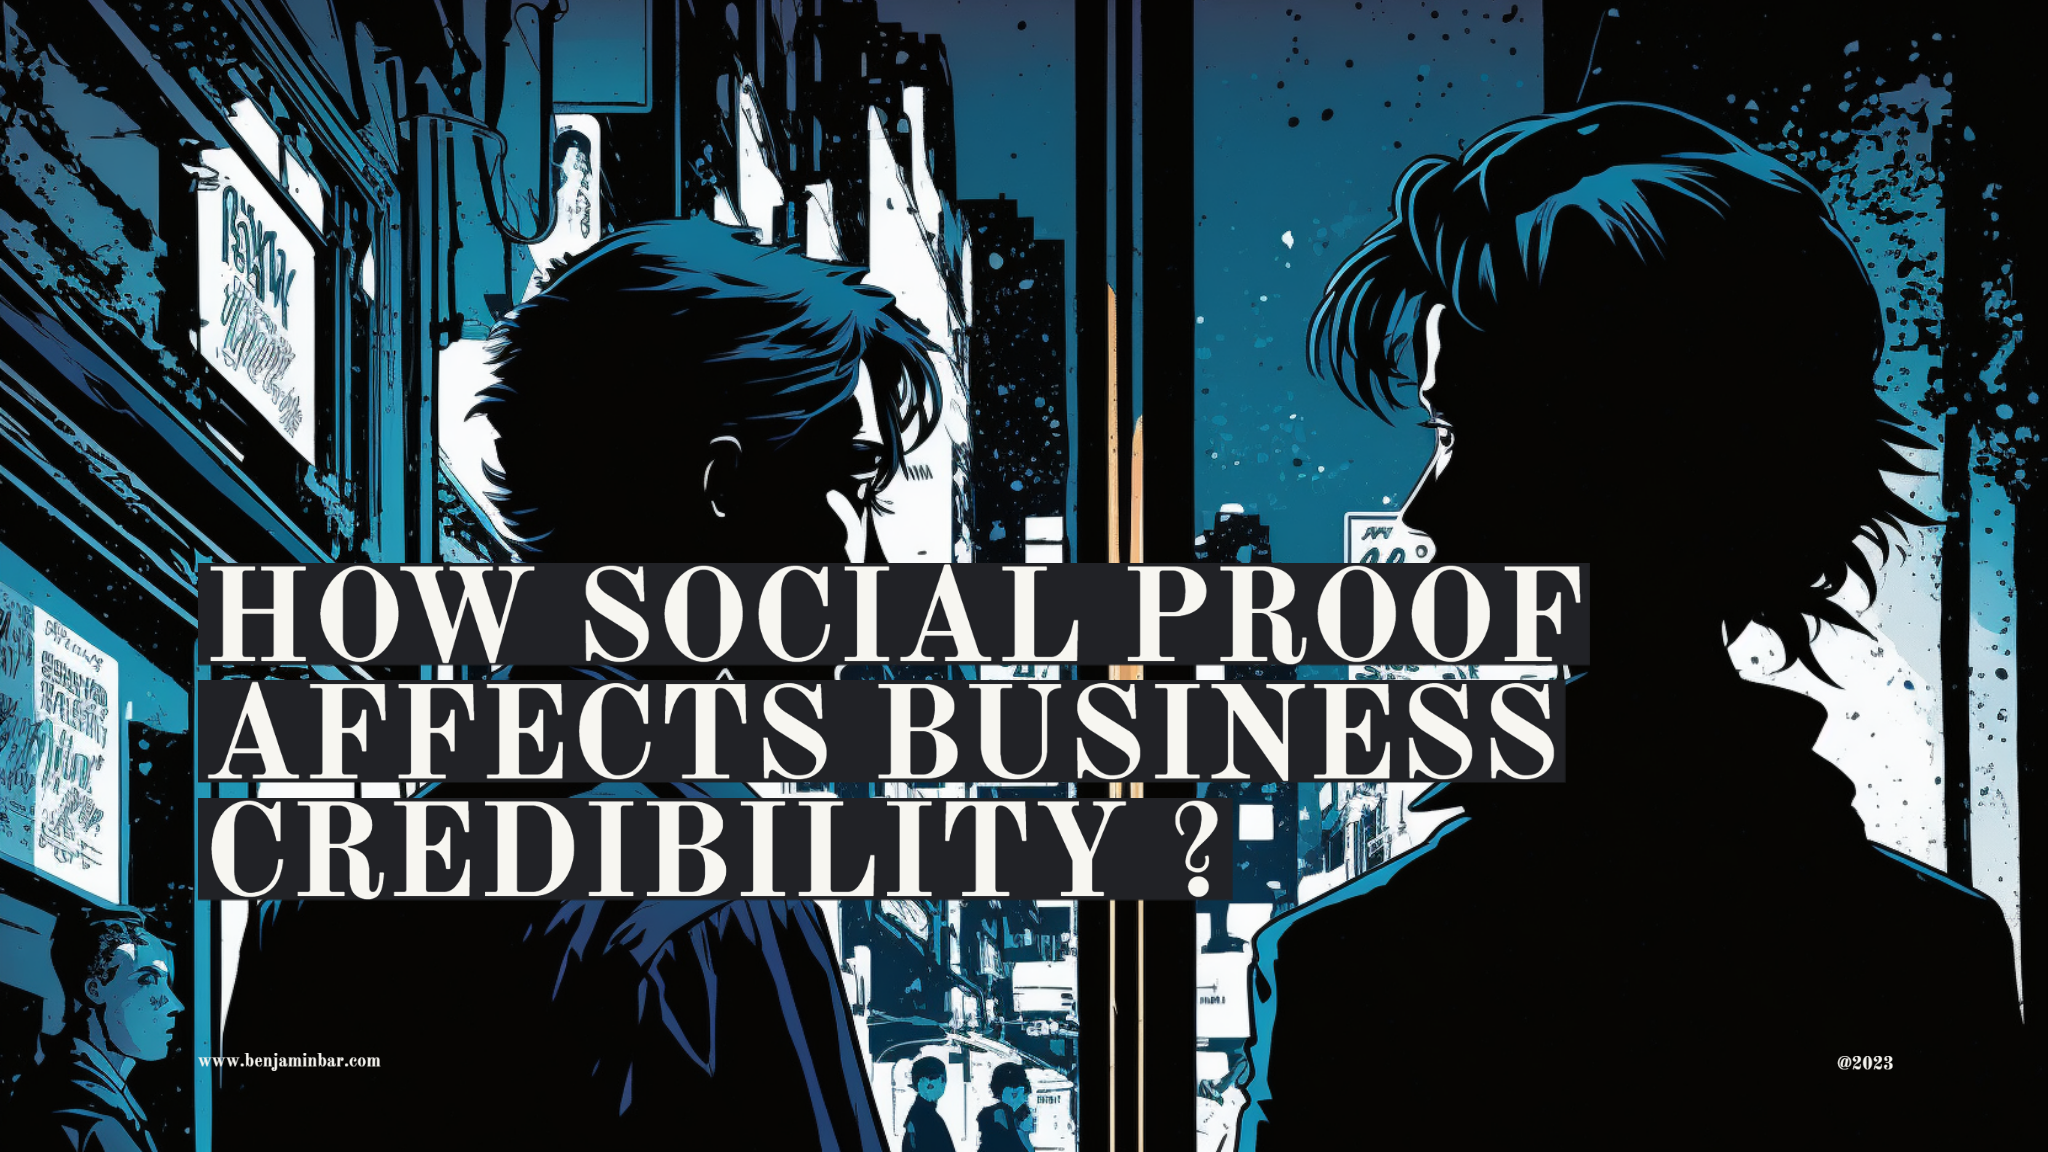 social proof affects business credibility